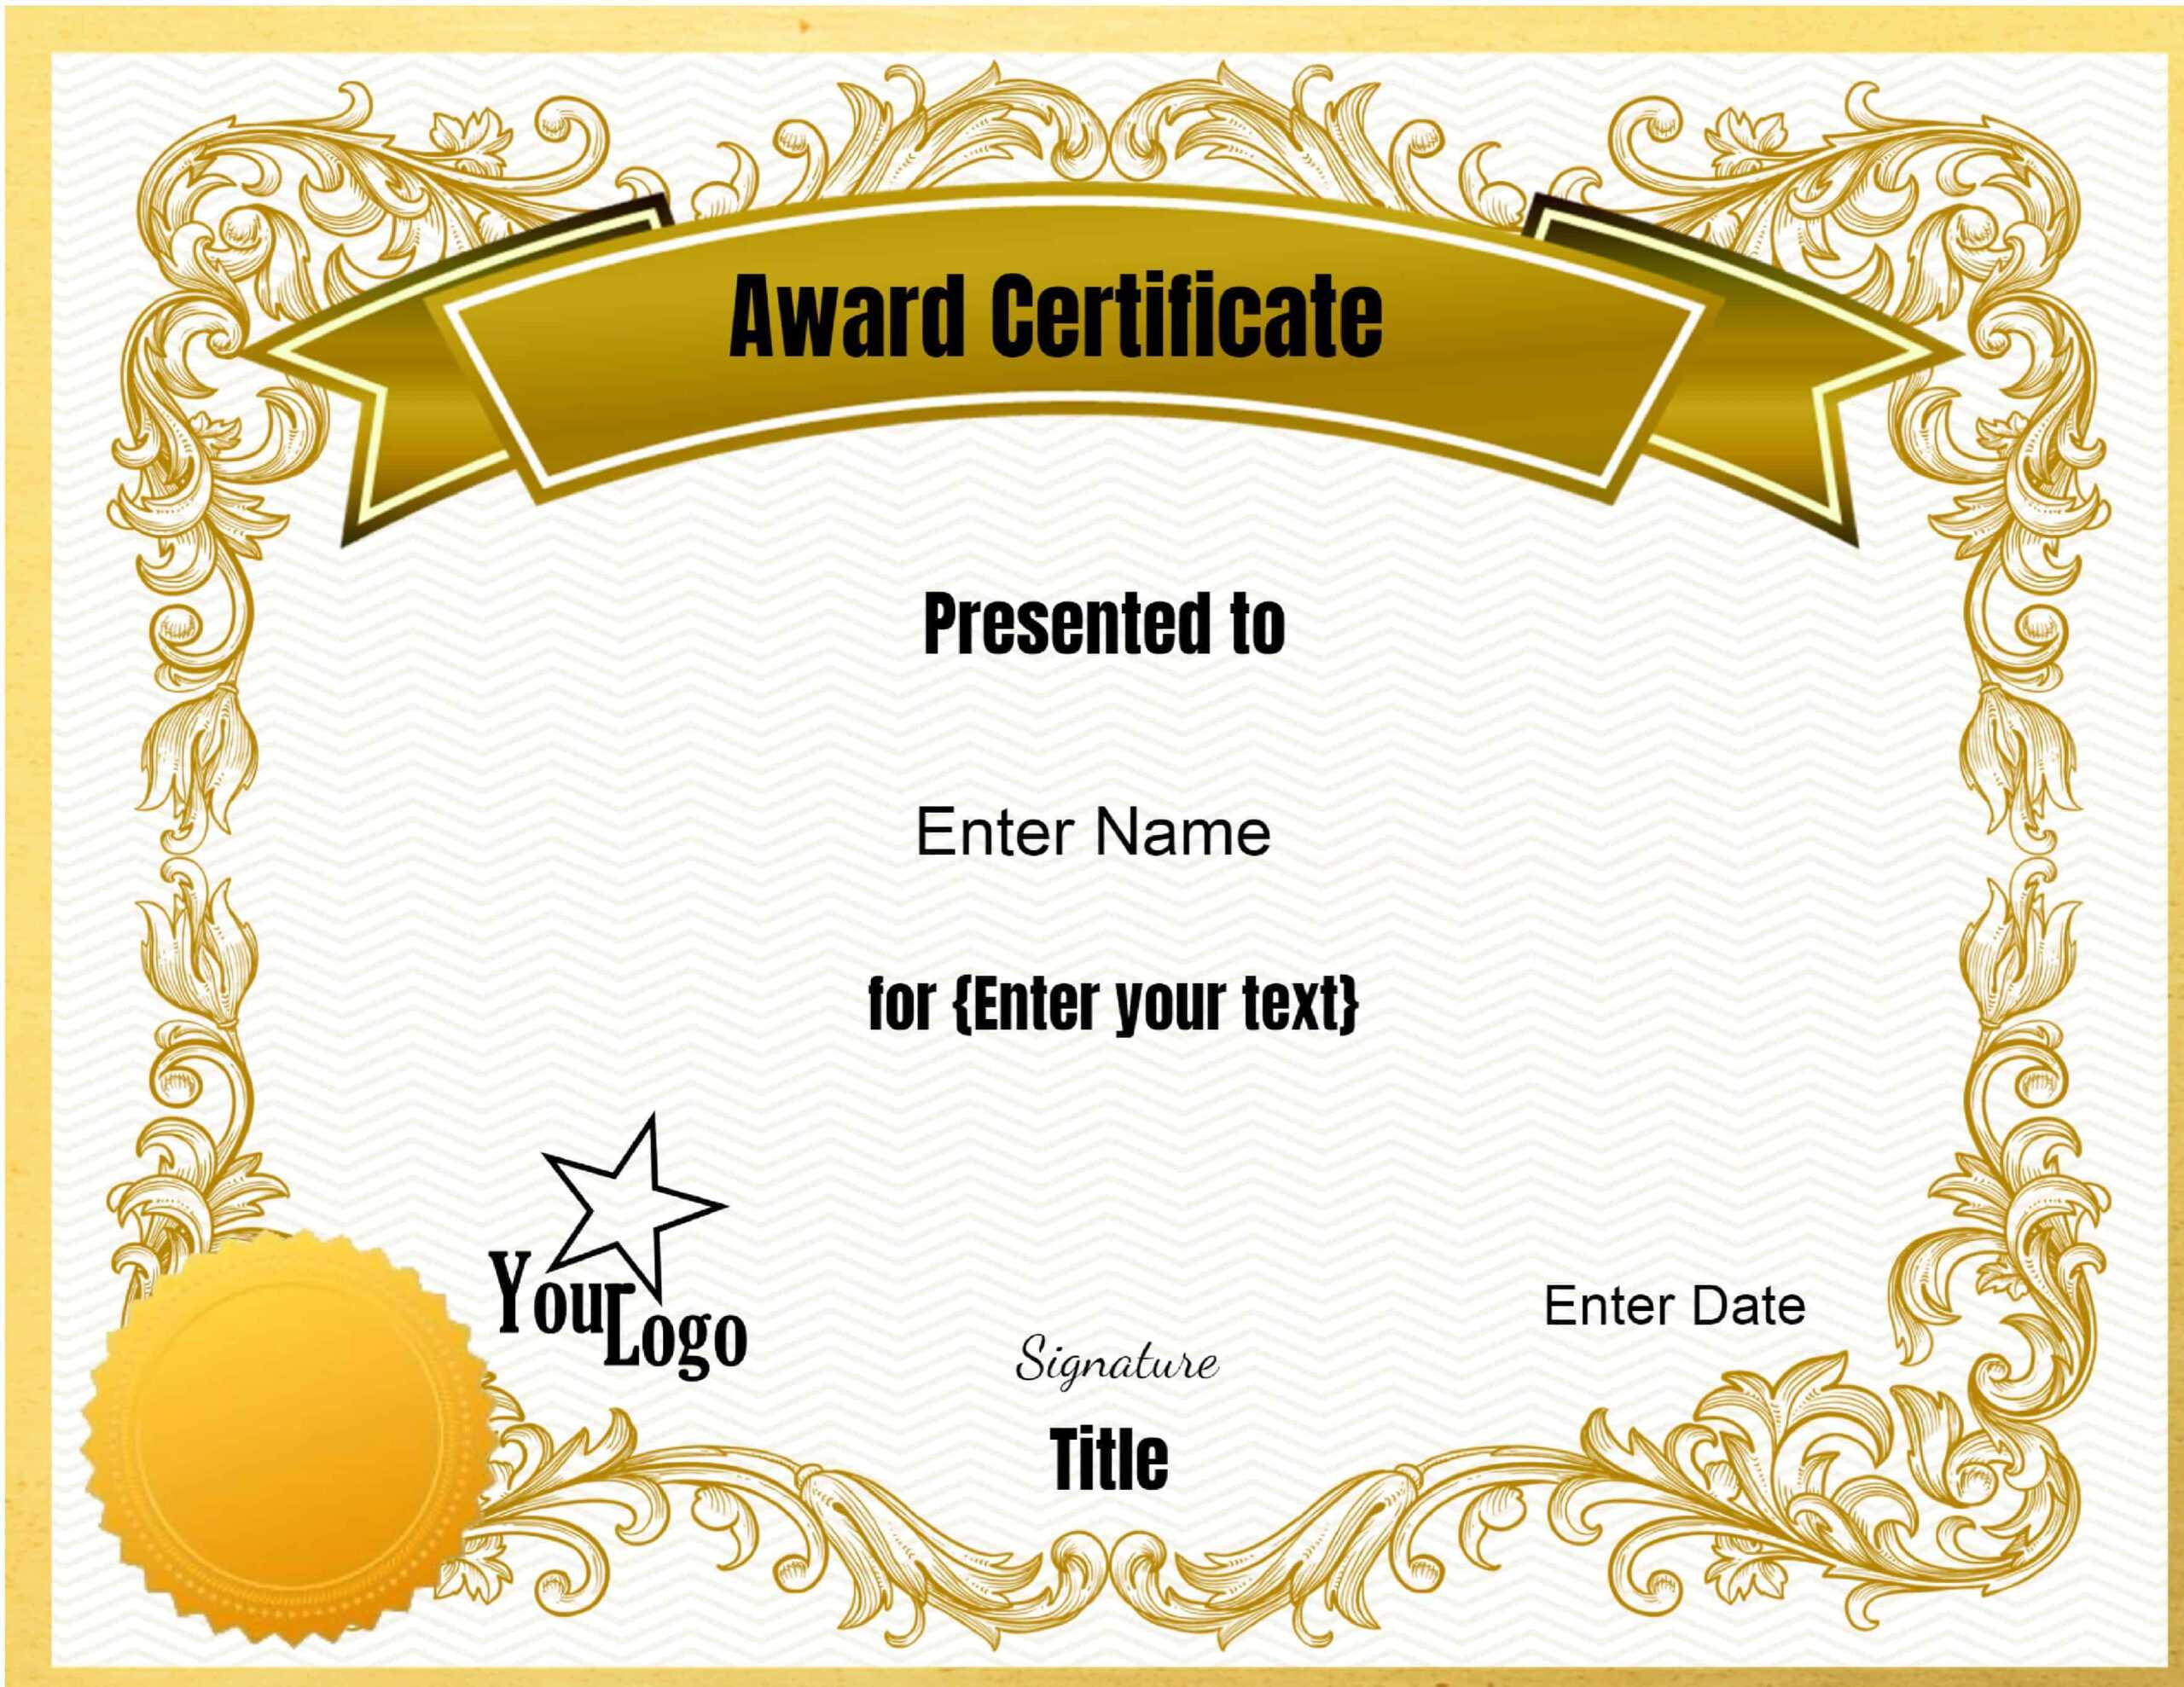 Free Editable Certificate Template | Customize Online With Sample Award Certificates Templates